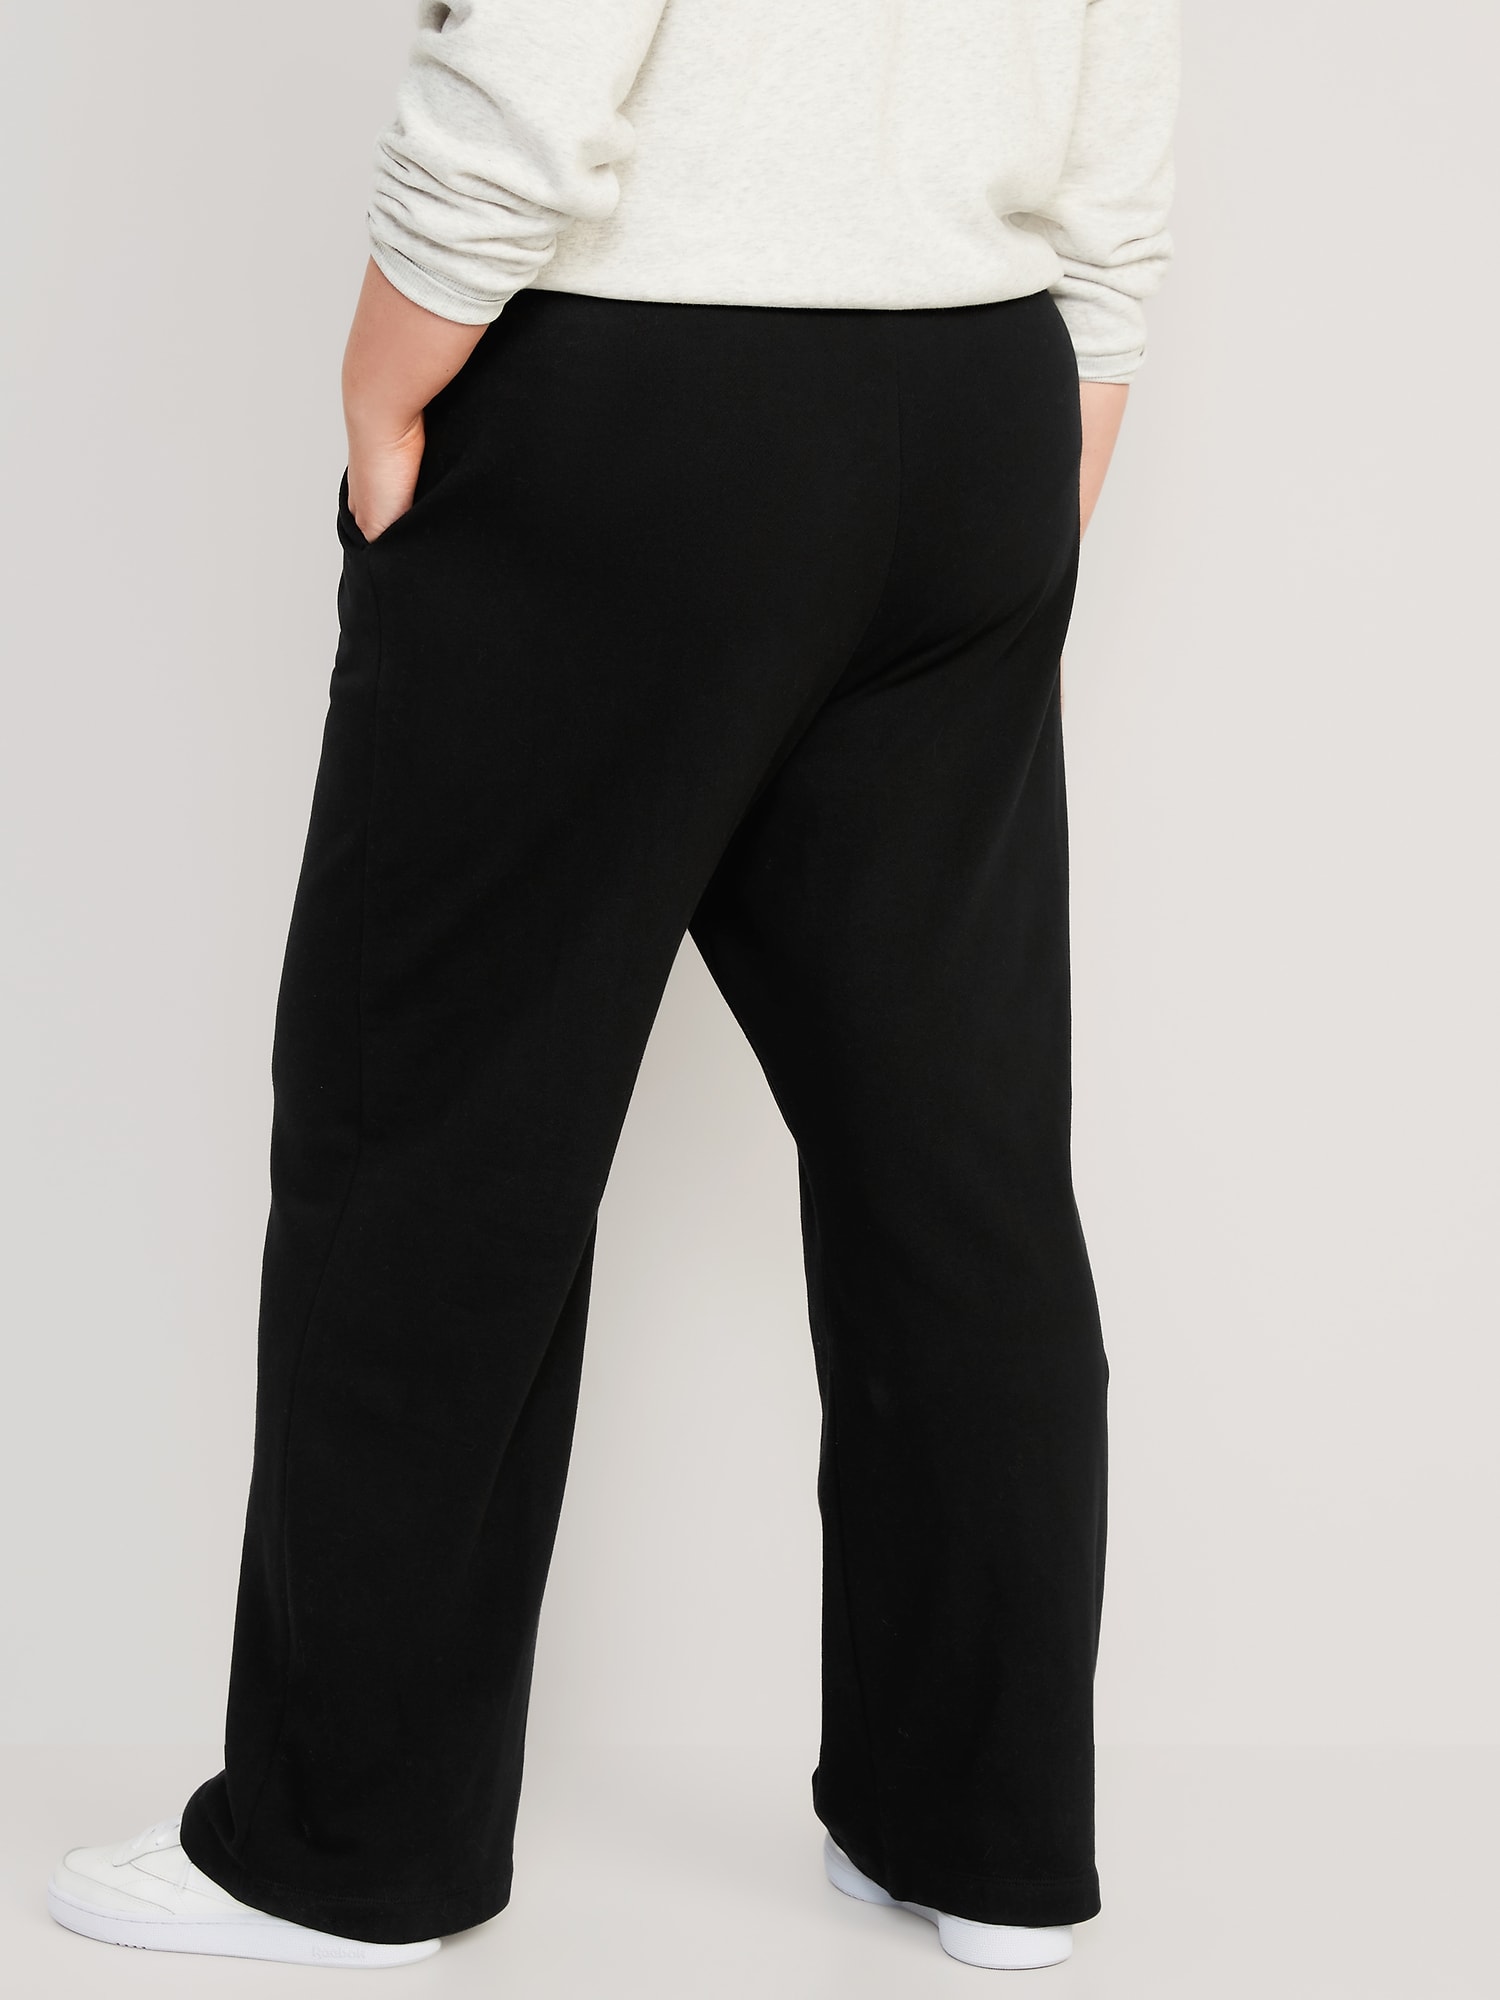 Extra High-Waisted Vintage Sweatpants for | Women Old Navy